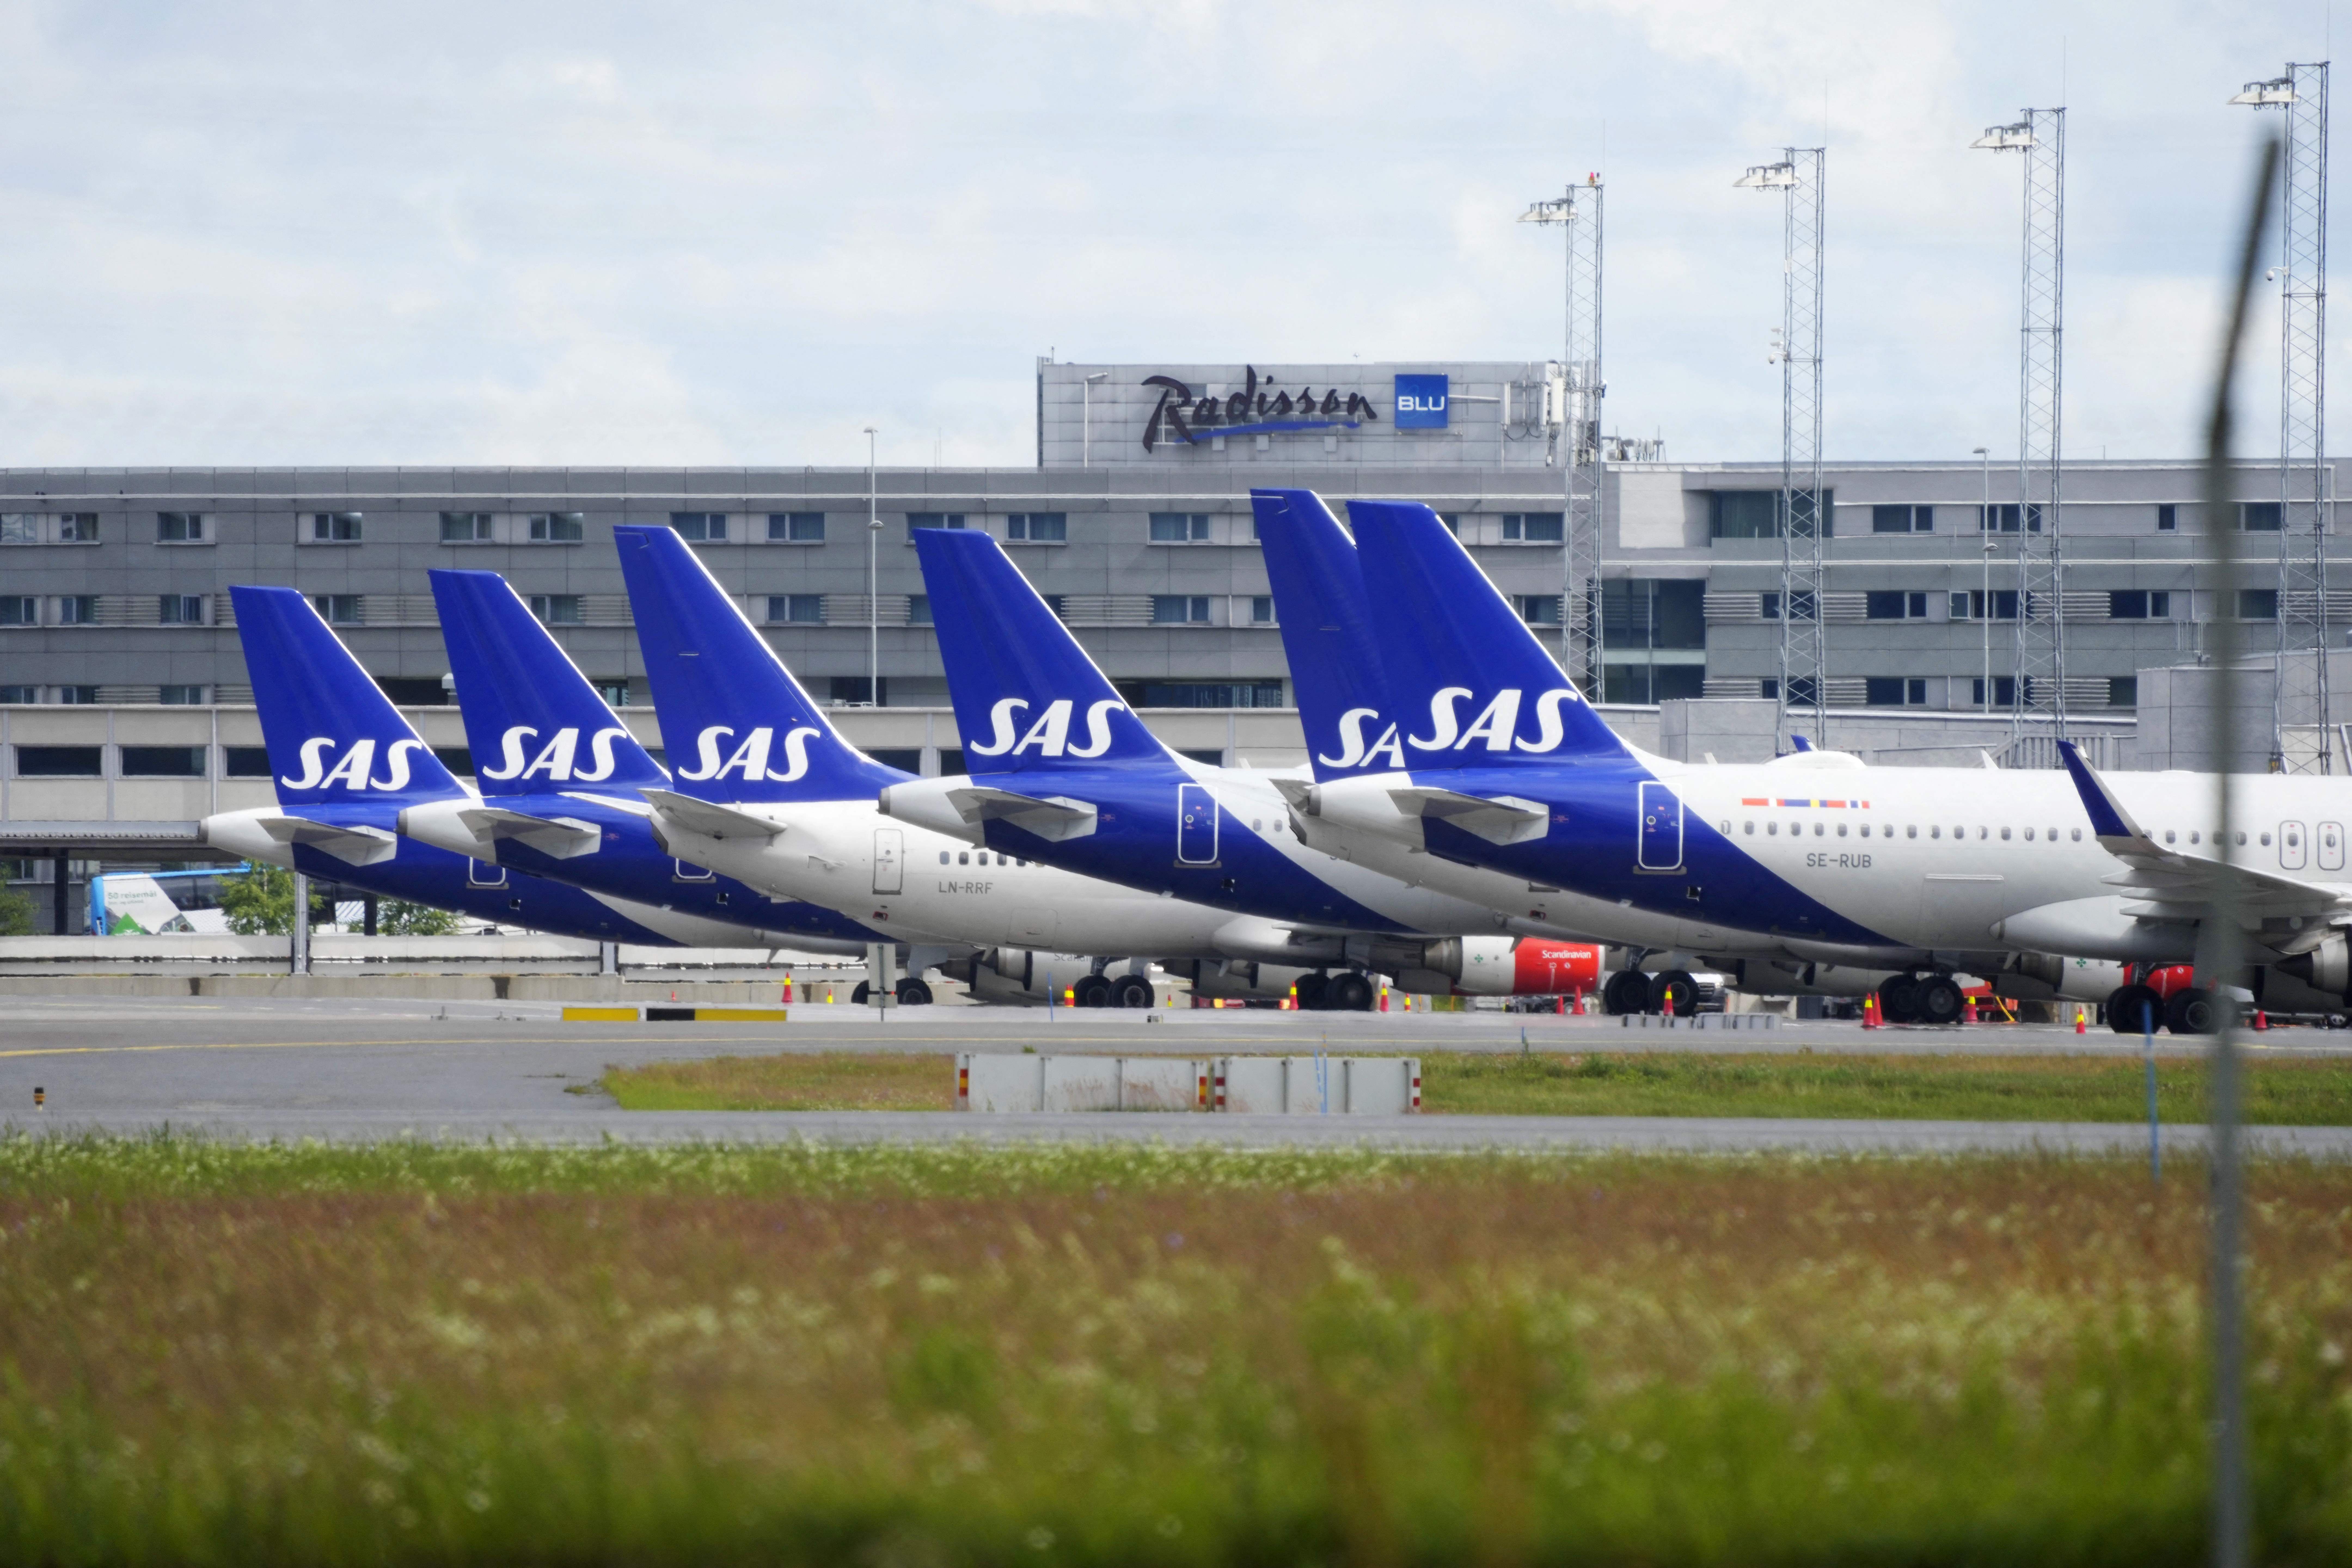 Planes of Scandinavian airline SAS sit on the tarmac in a row on July 4, 2022 at Oslo Airport Gardermoen.